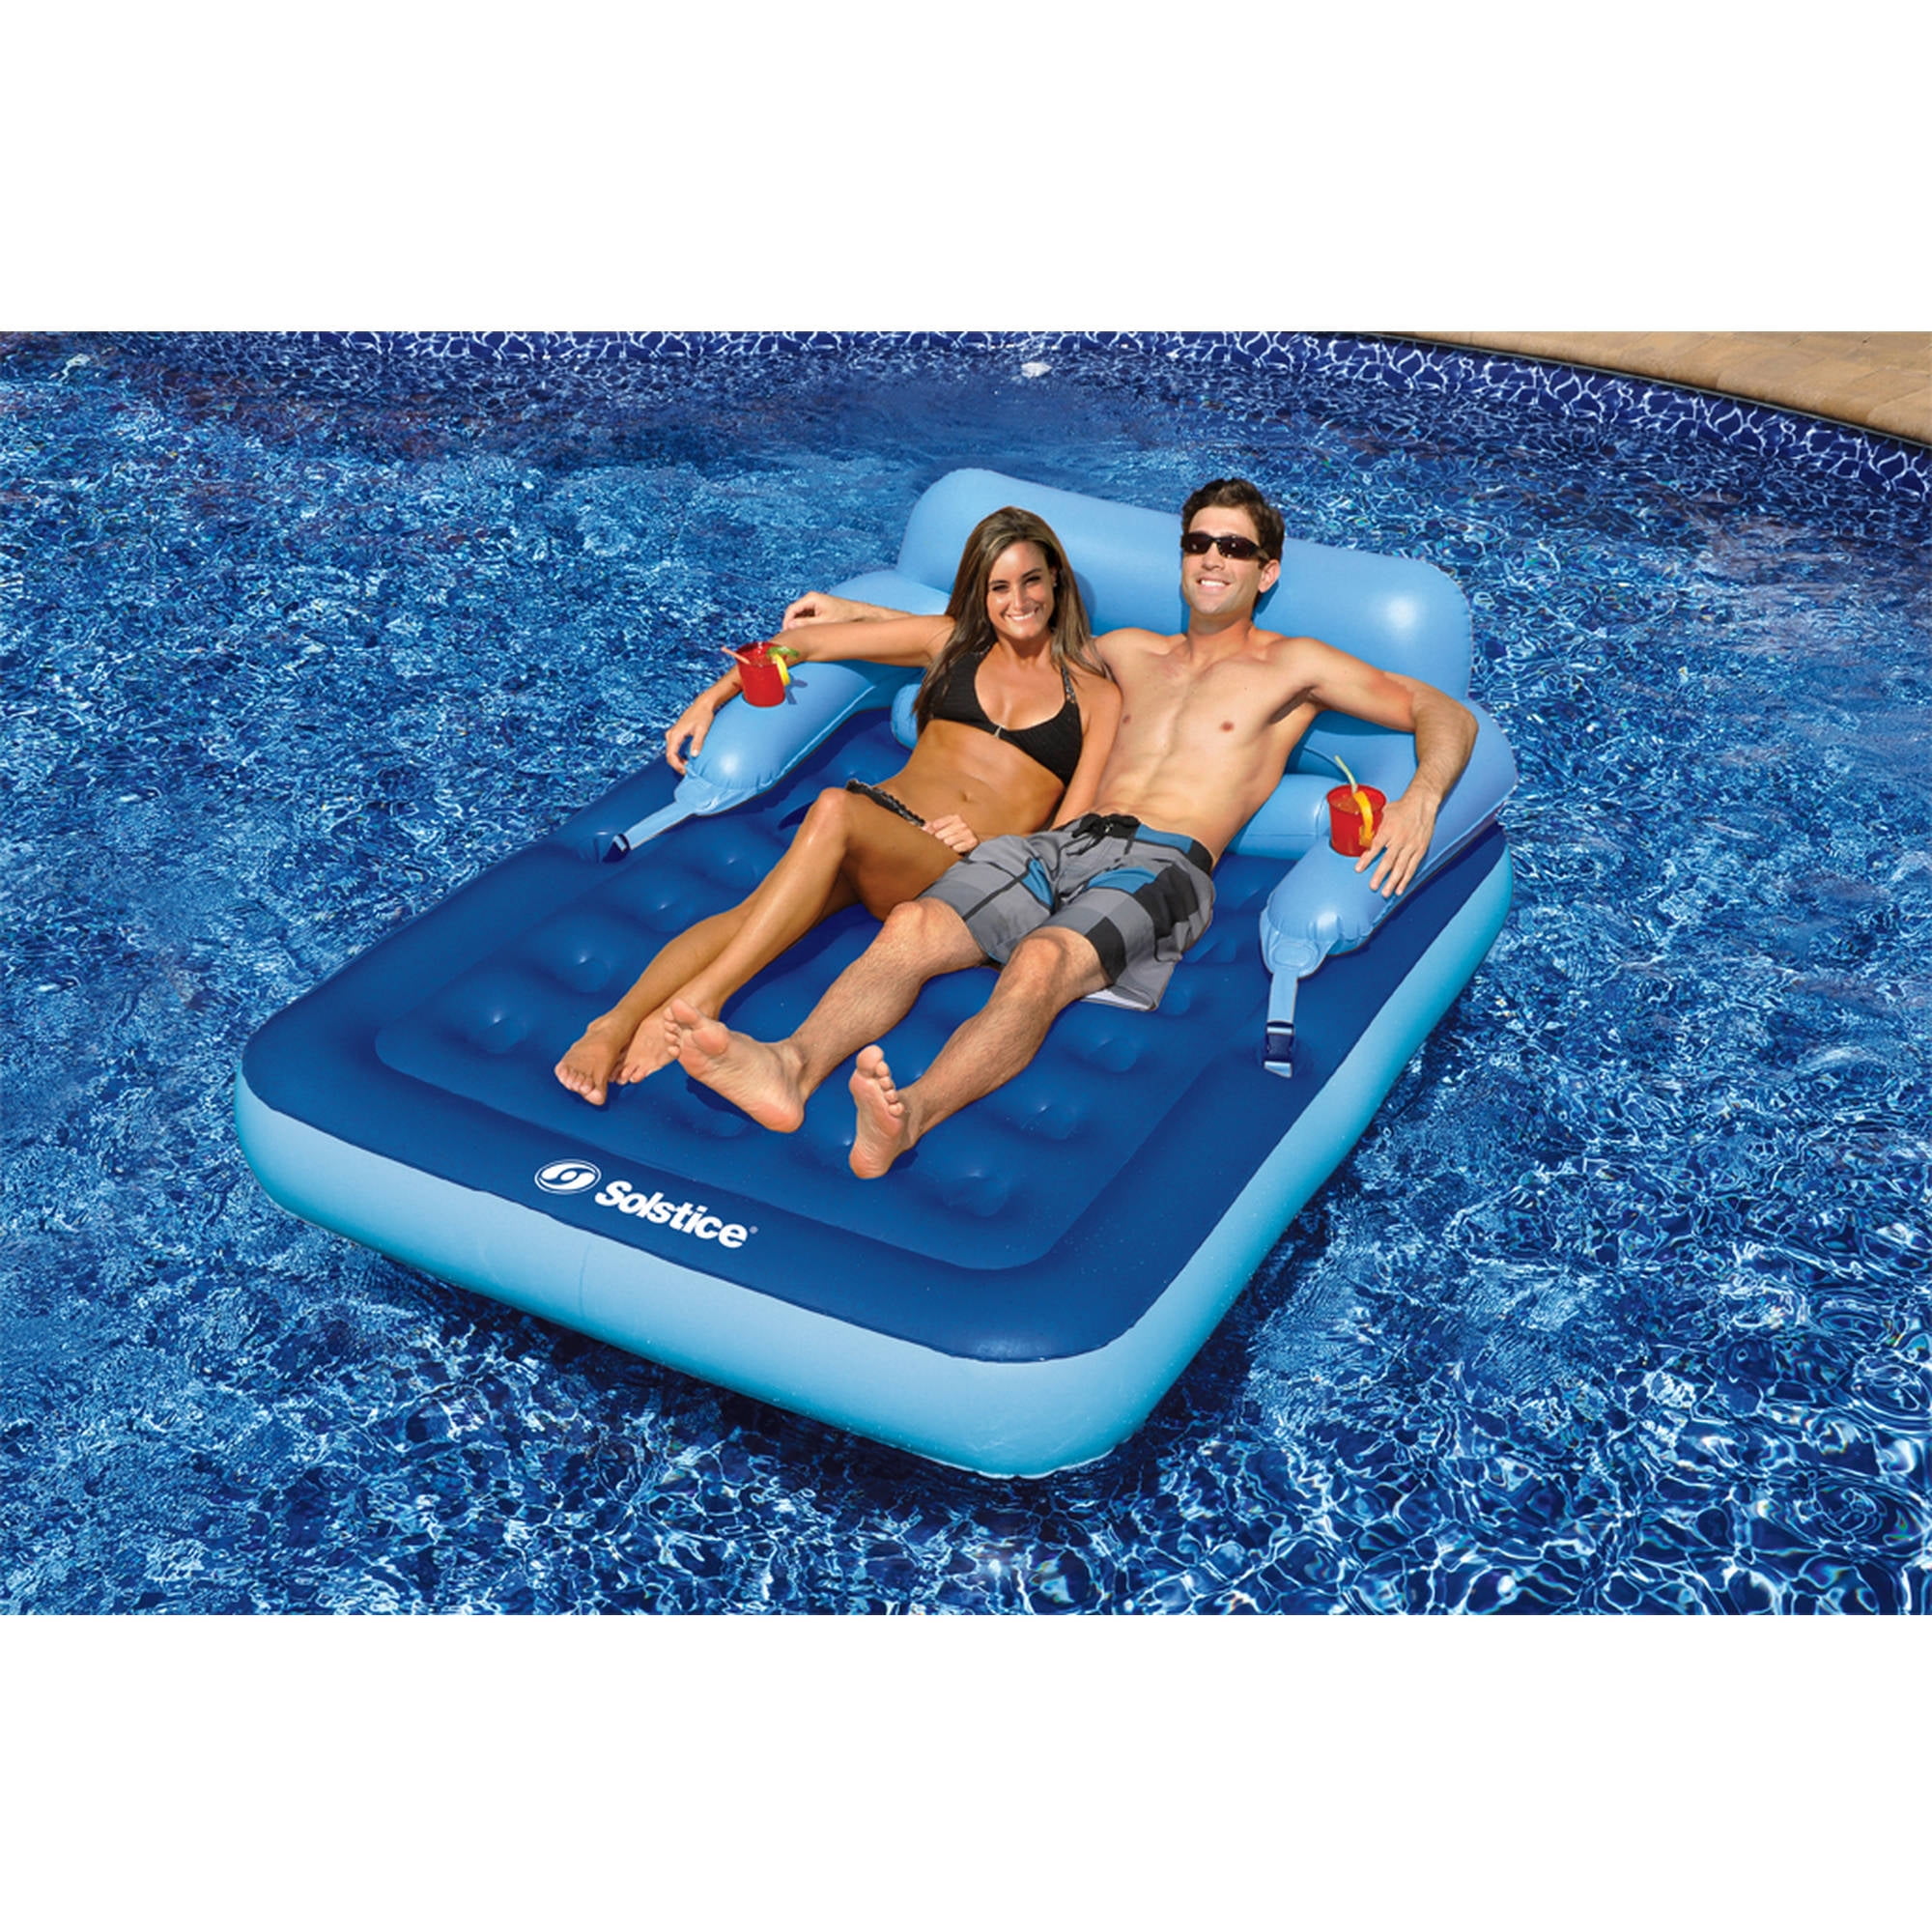 G1 Swimming Pool float Lounger raft suntan with pillow back 59 X 34 Inches 